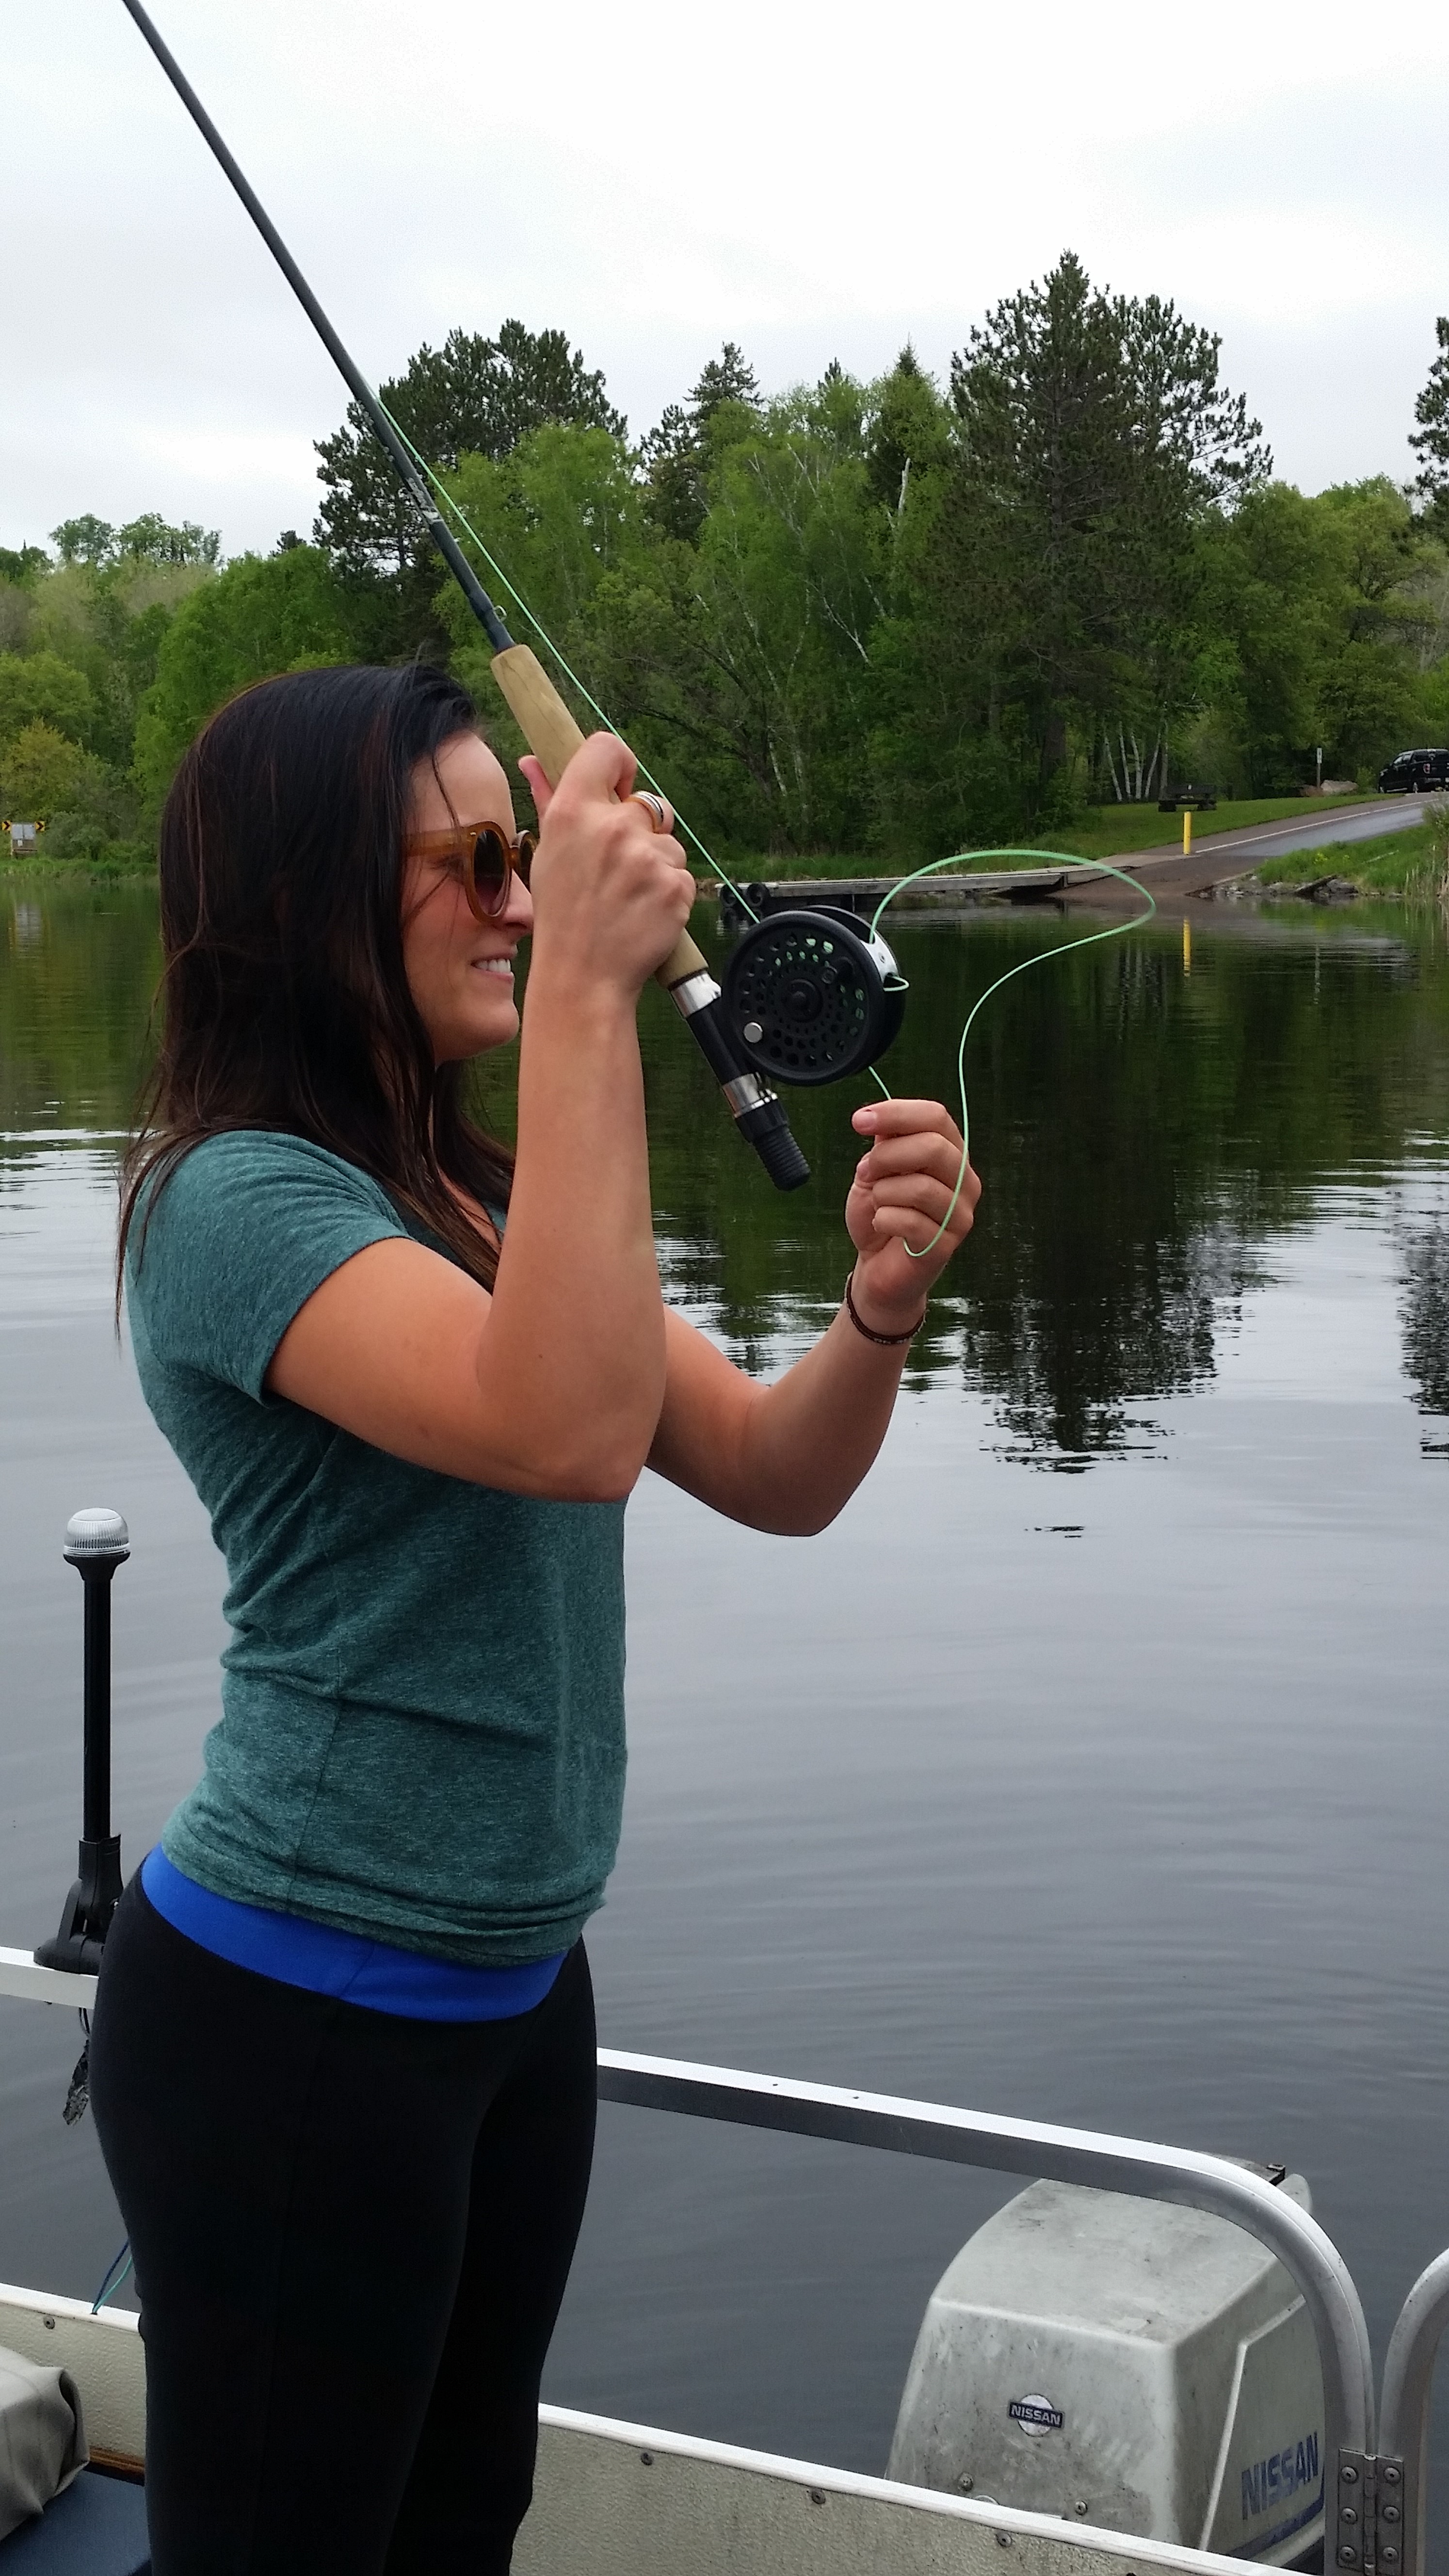 Chicks With A Pole- Women Fly Fishing For Bluegills - Mid West